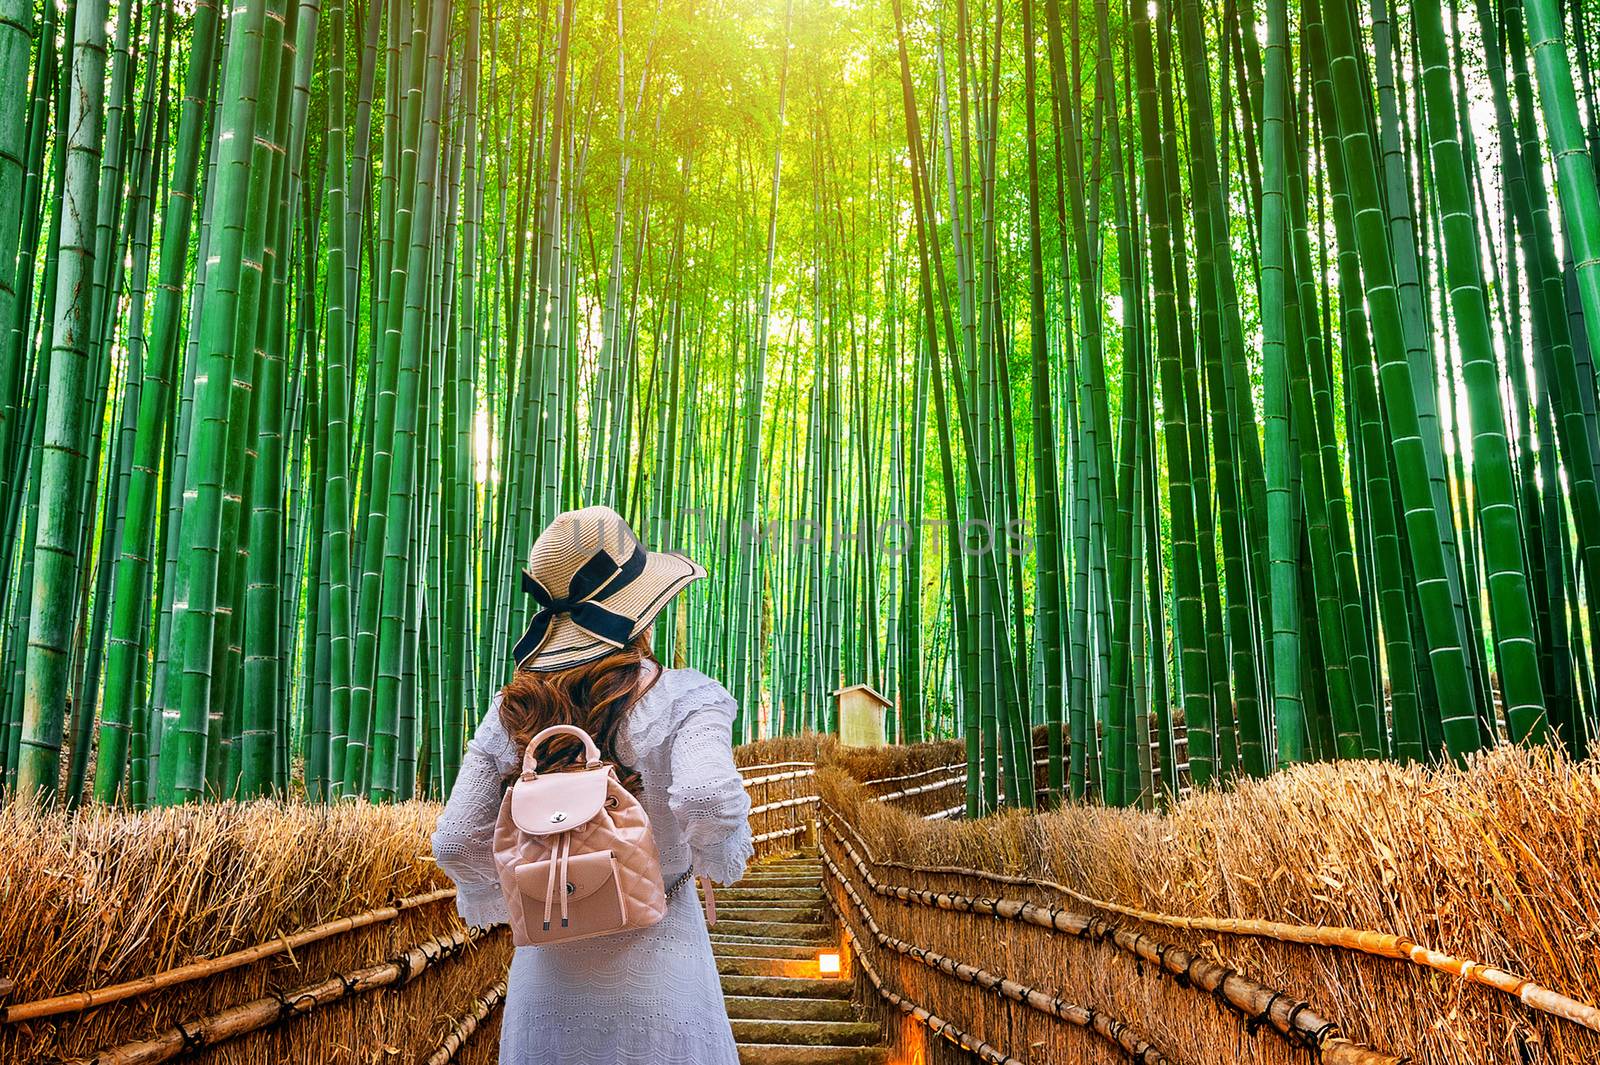 Woman walking at Bamboo Forest in Kyoto, Japan.